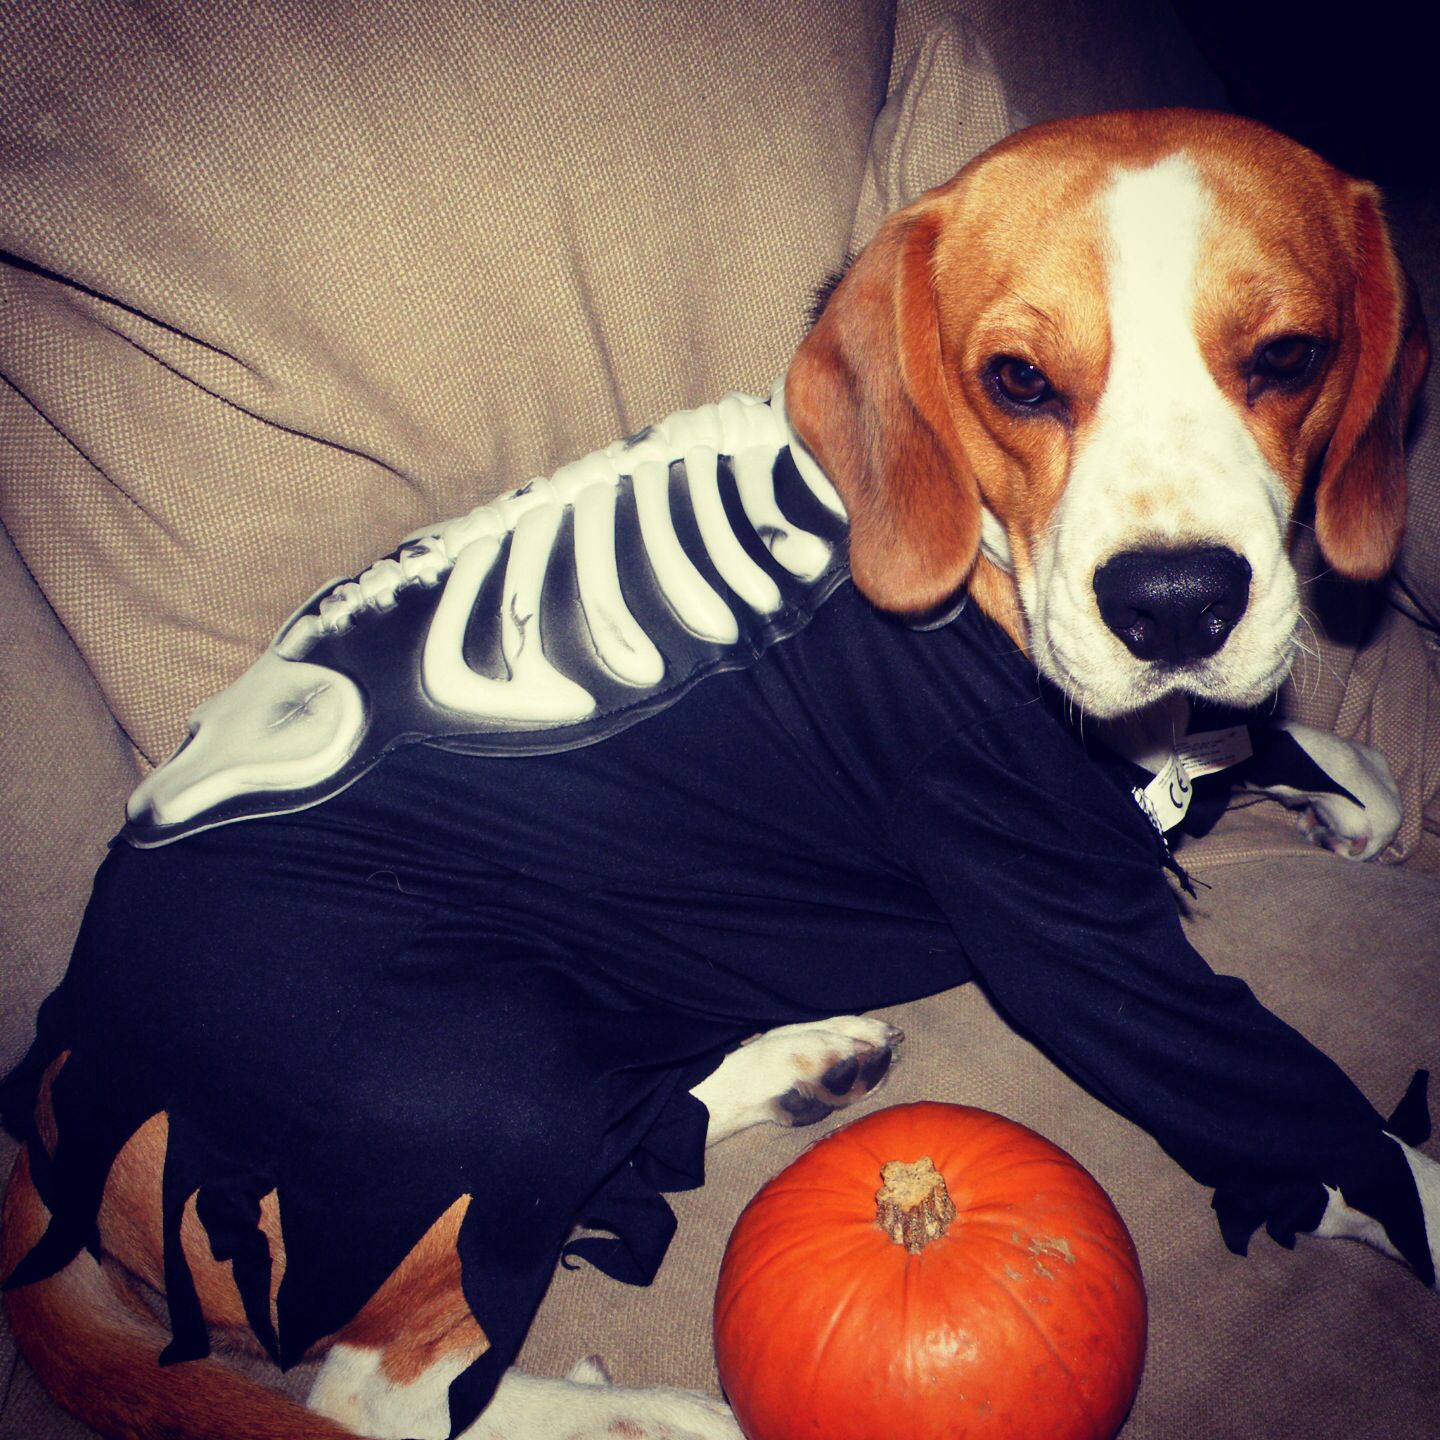 Beagle wearing a skeleton costume while lying on the couch with a small pumpkin